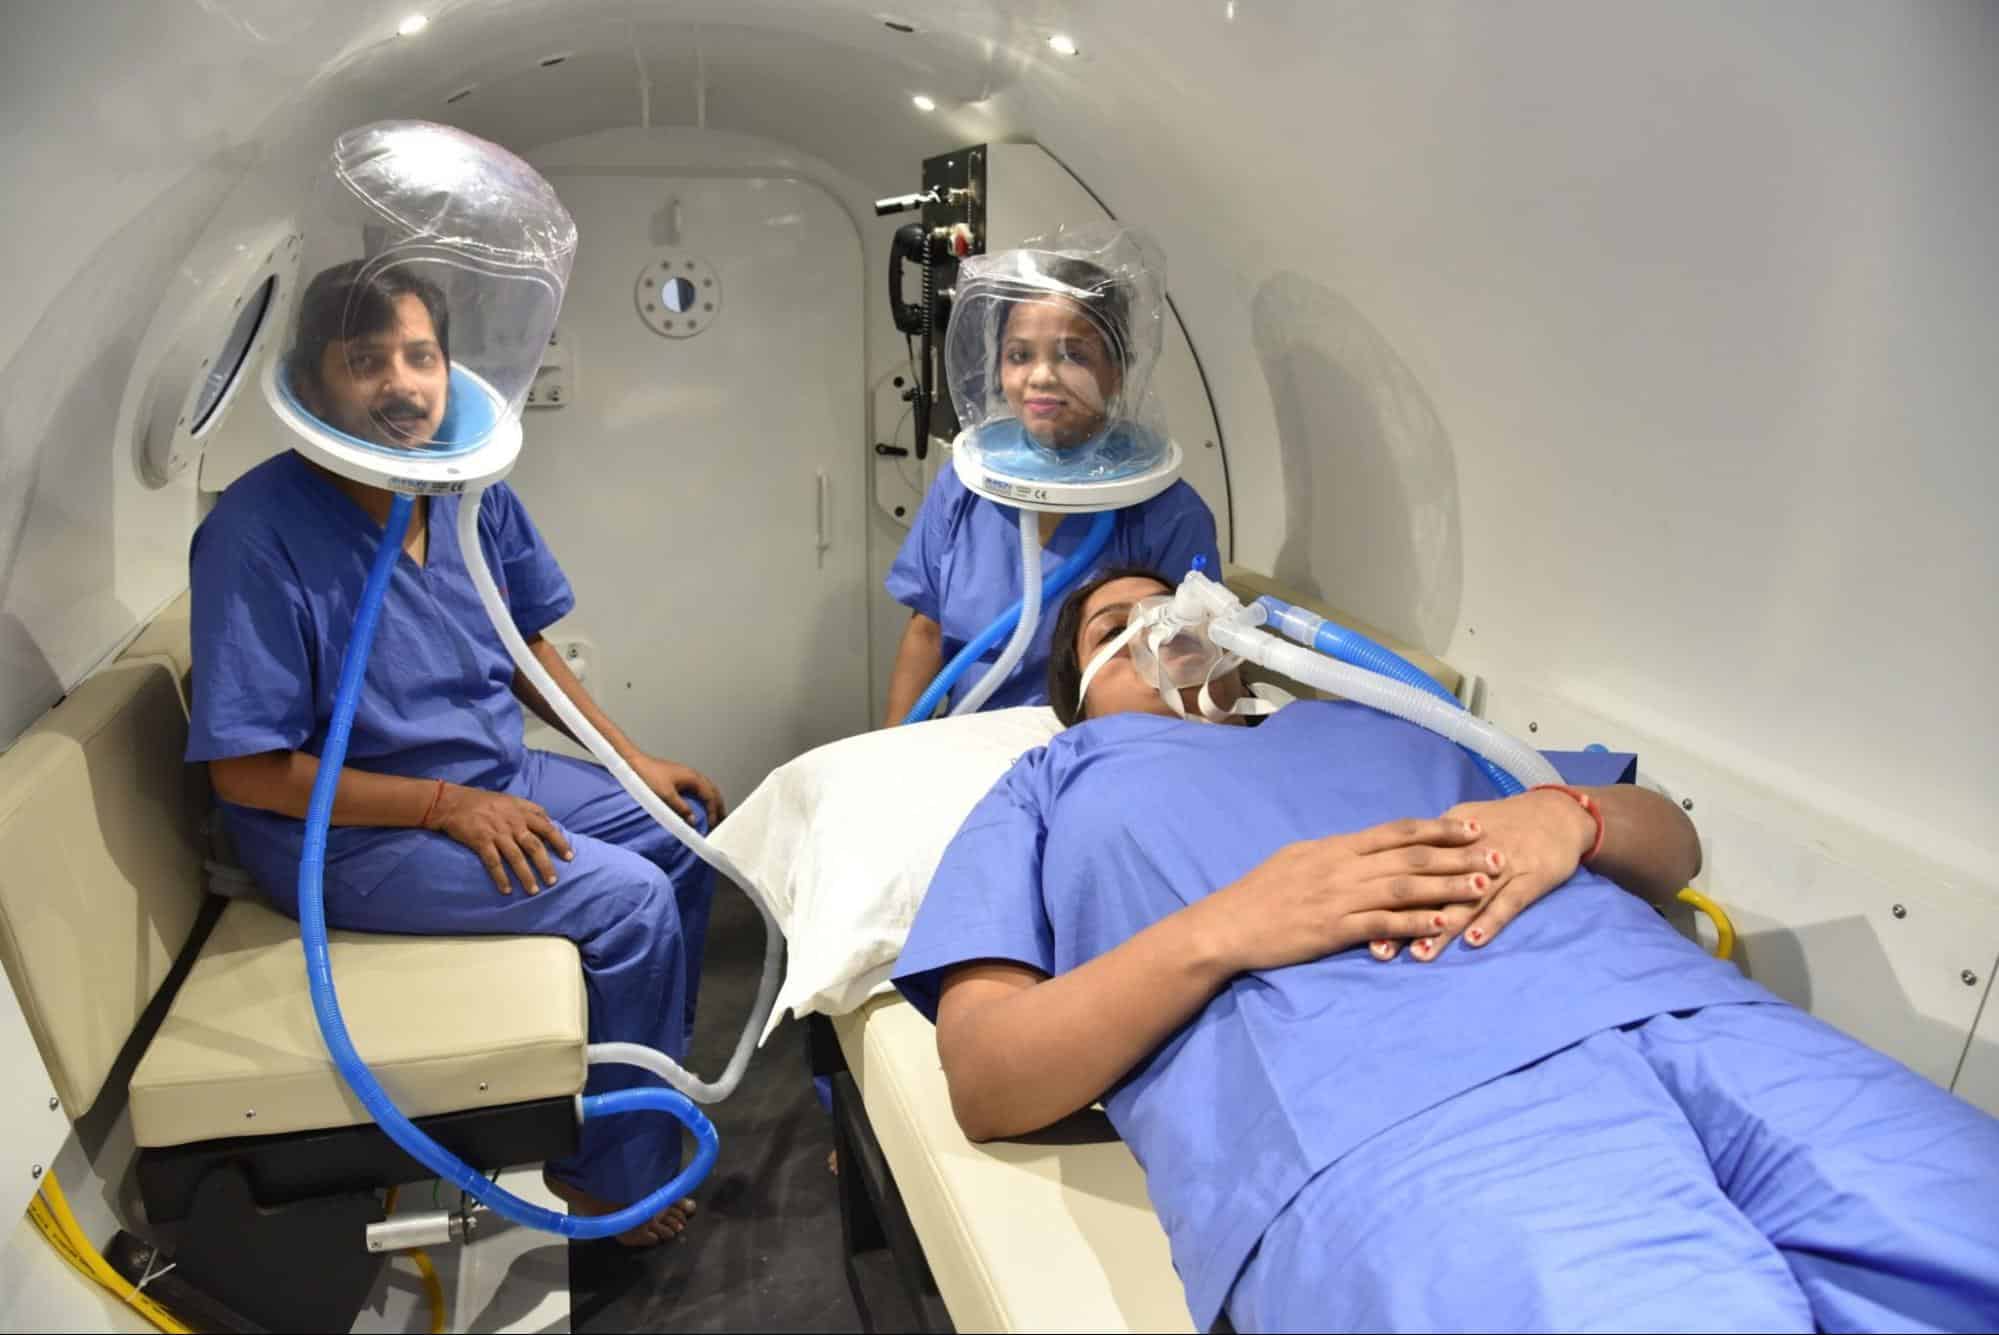 Patients exposed to hyperbaric oxygen pressure